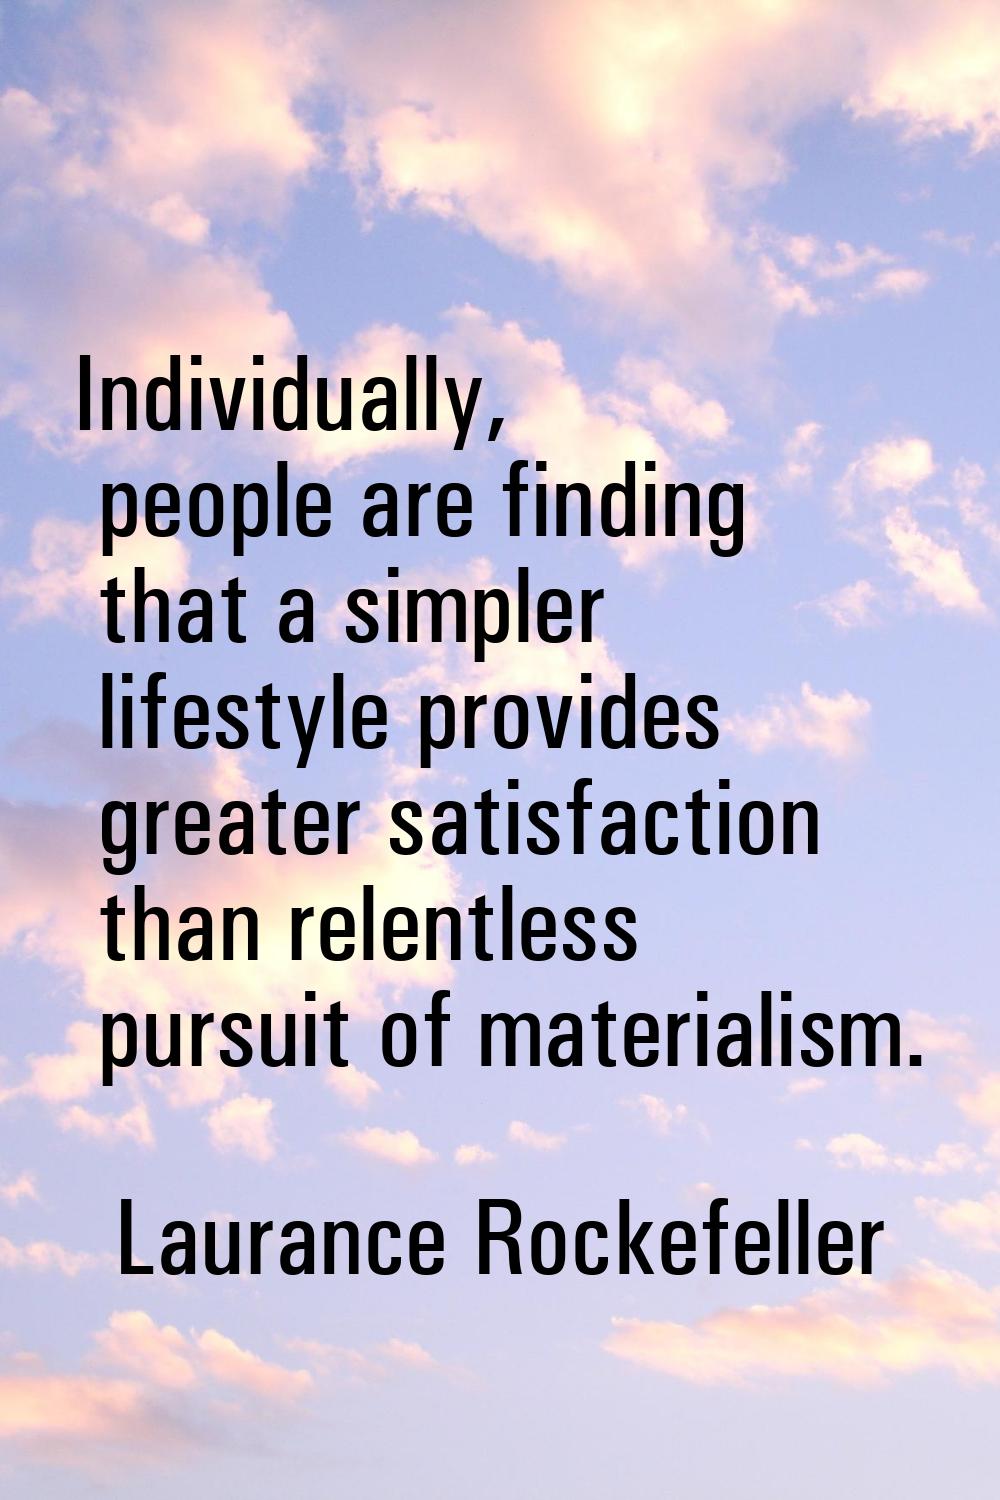 Individually, people are finding that a simpler lifestyle provides greater satisfaction than relent